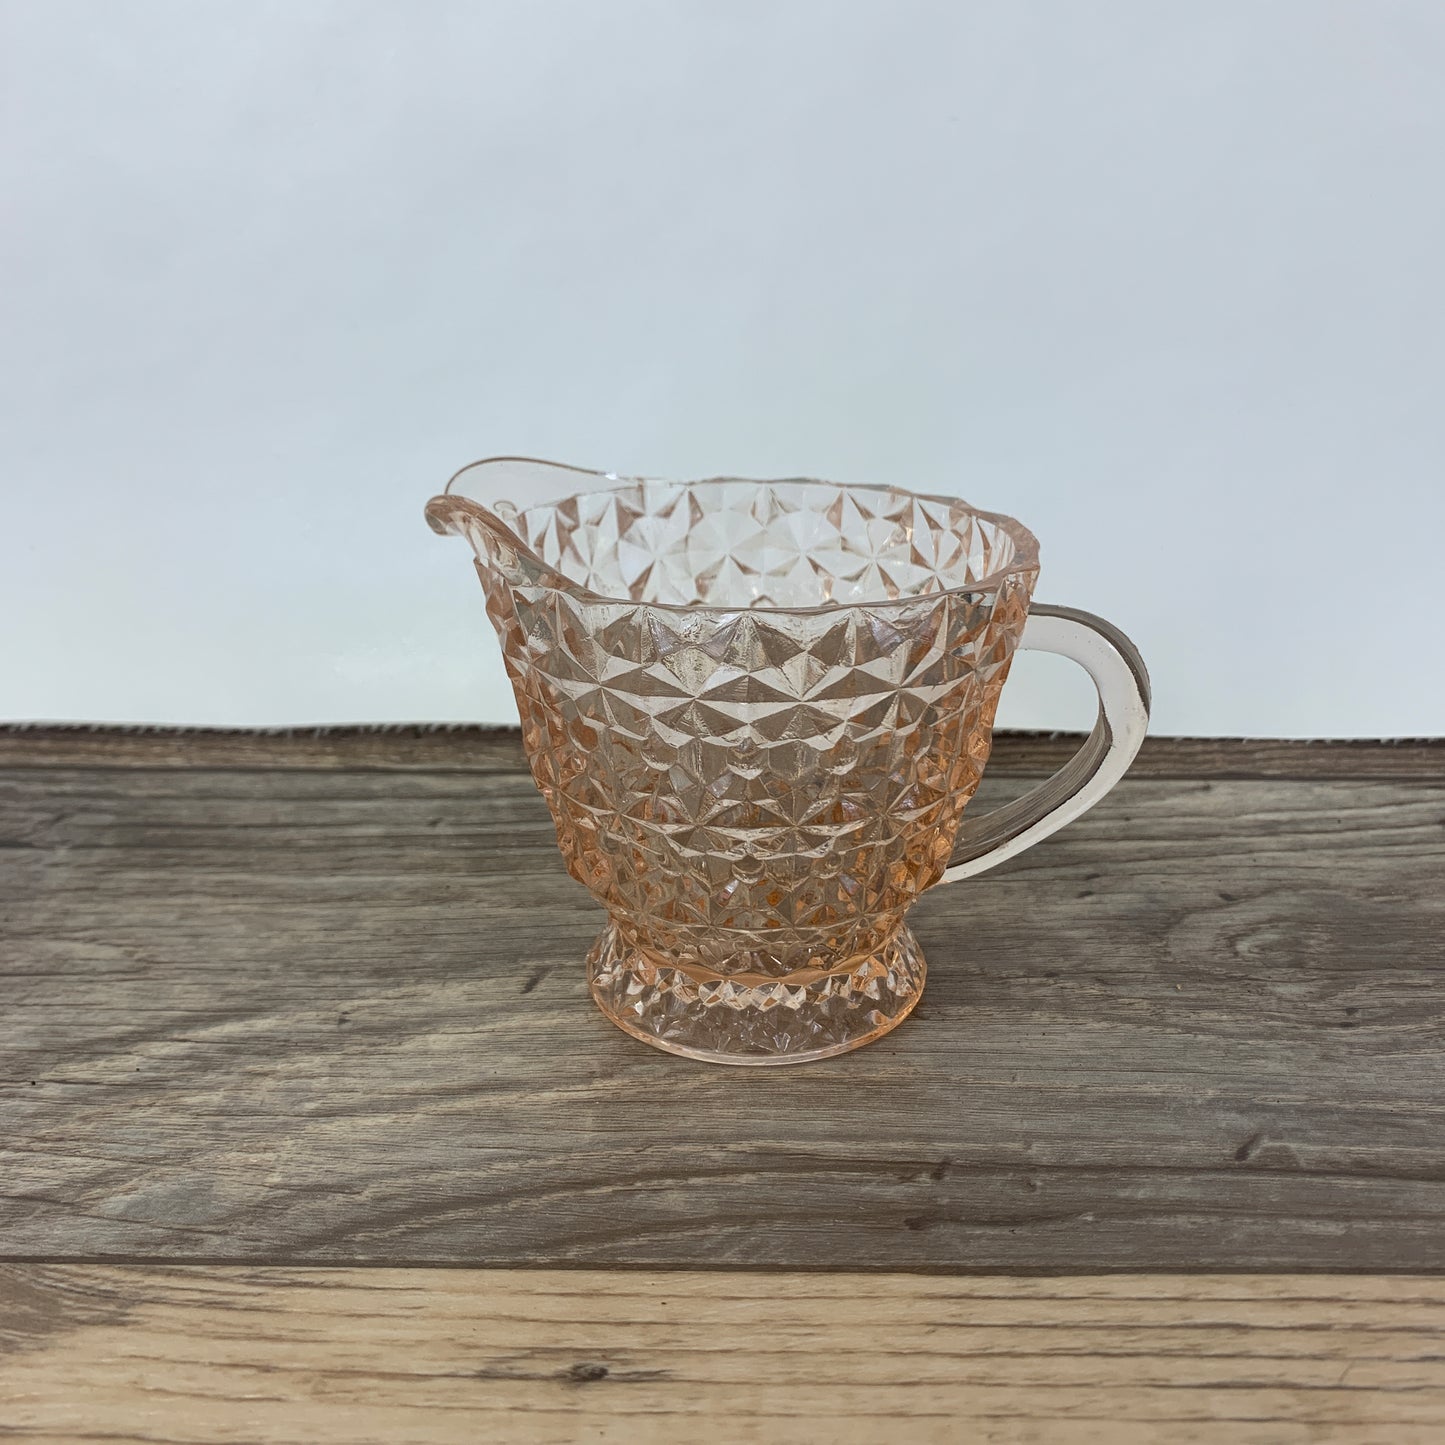 Pink Depression Glass Cream Pitcher, Jeanette Glass Buttons and Bows, Jeanette Glass Holiday Pattern